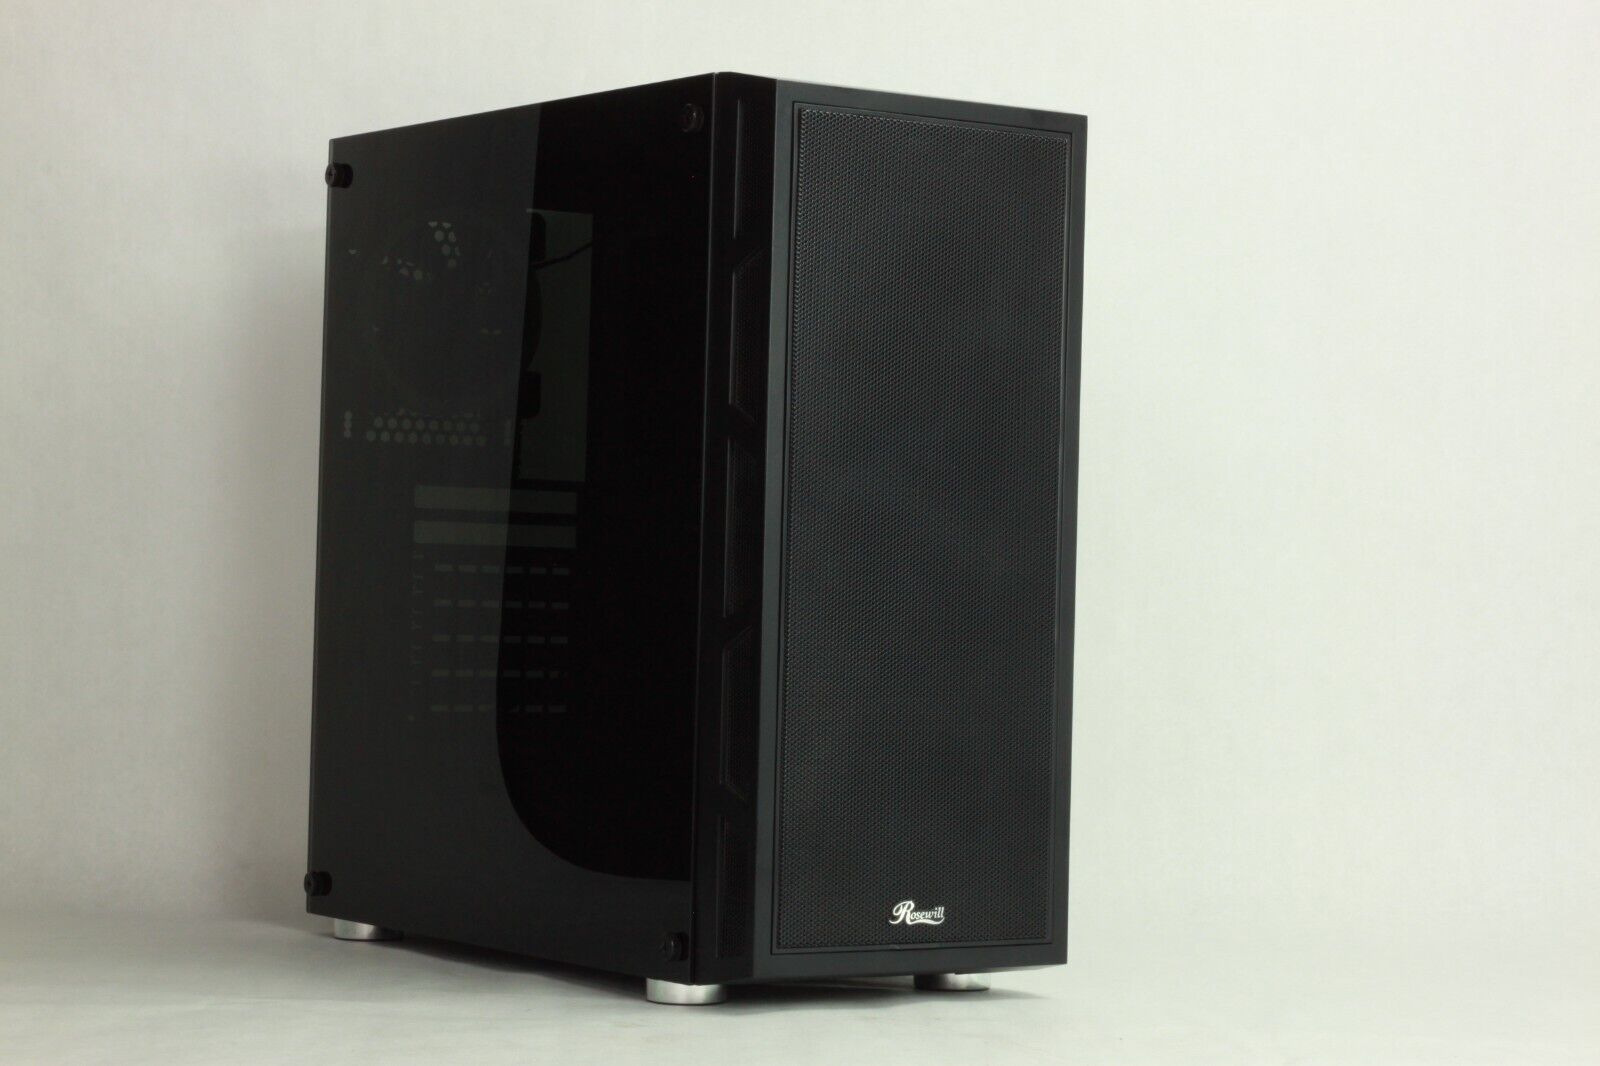 Rosewill Mid Tower Case SPECTRA C100 w/ Rosewill Hive 1000W PSU 4x120MM Fans